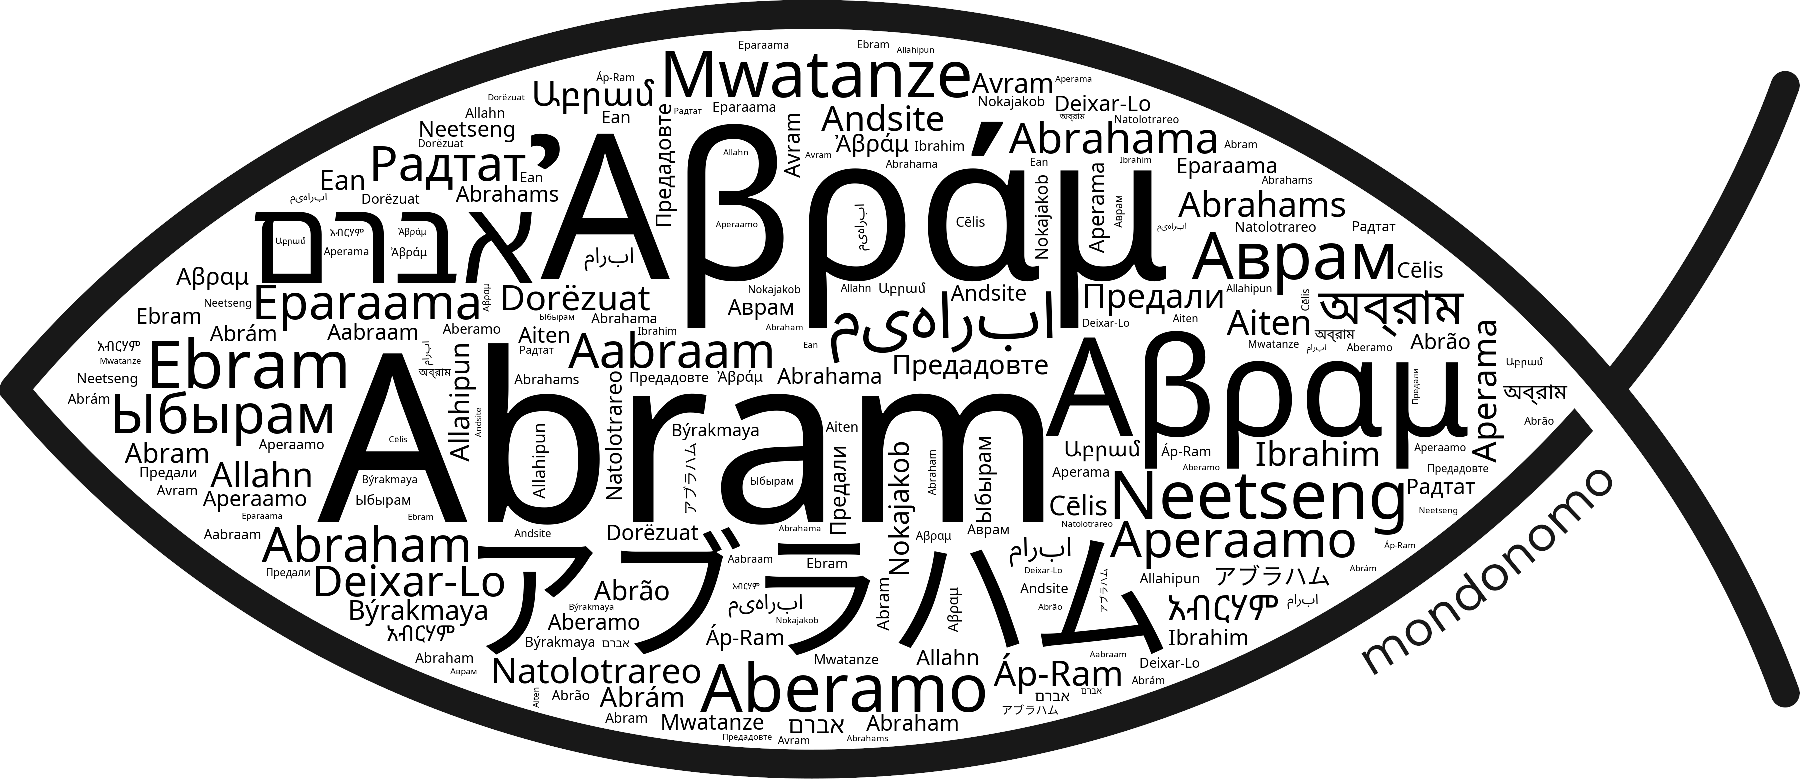 Name Abram in the world's Bibles